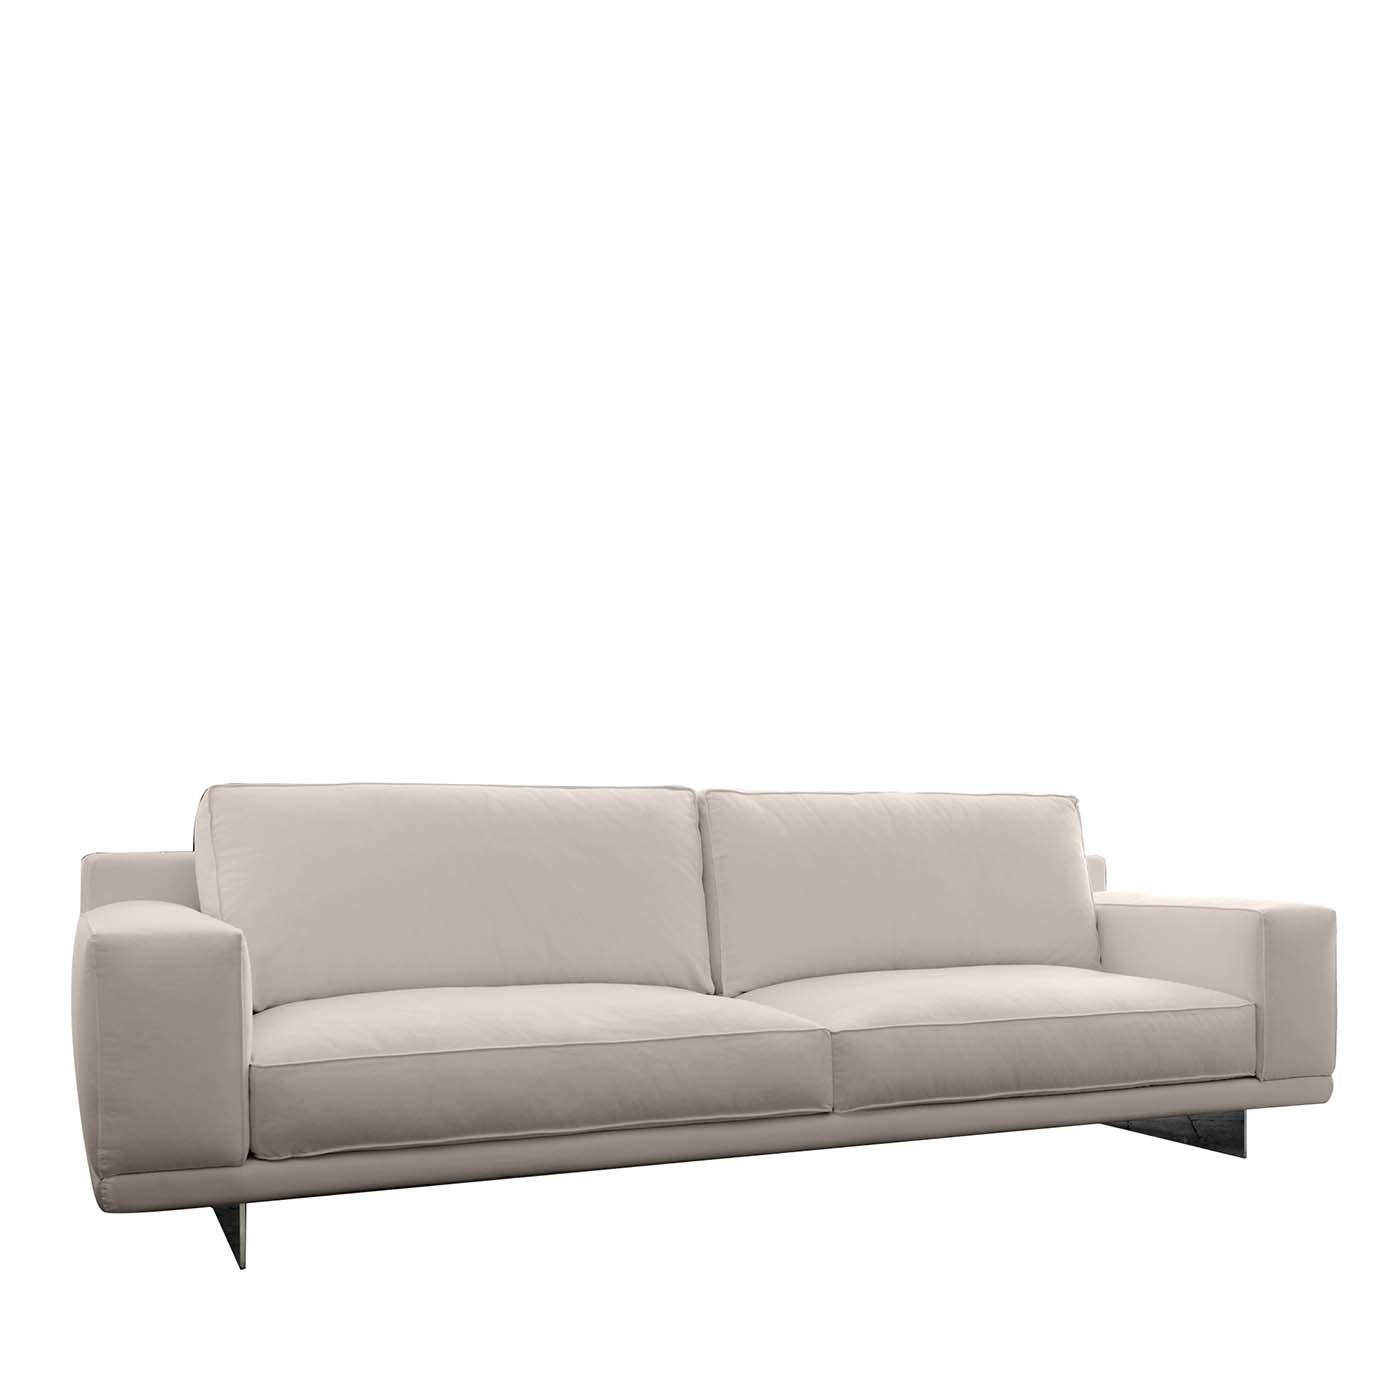 Revisiting traditional lines with a modern look and a constant eye on comfort, this slender sofa is raised on a platform supported by two steel rectangular legs with a white finish (also in polished chrome) to complement the white Dacron upholstery.